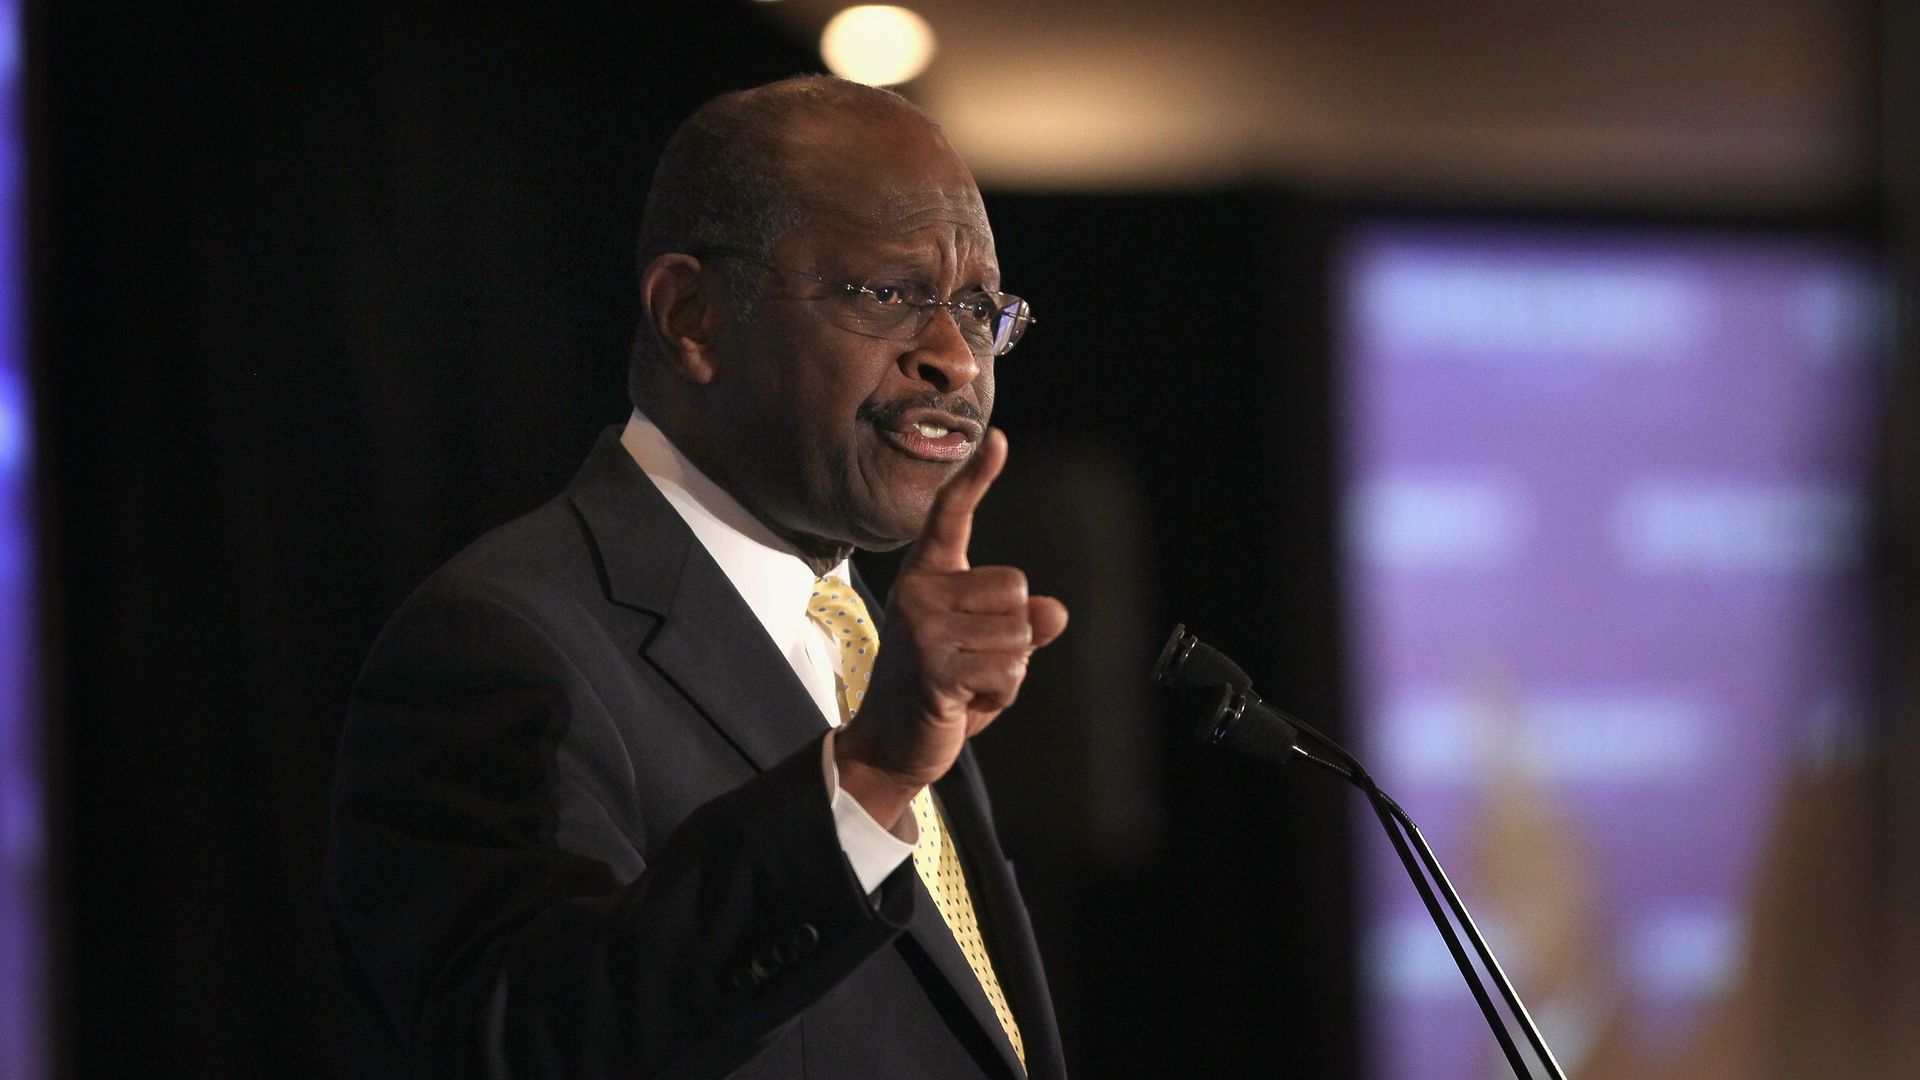 In this image, Herman Cain points a finger in the air while speaking into a microphone. 